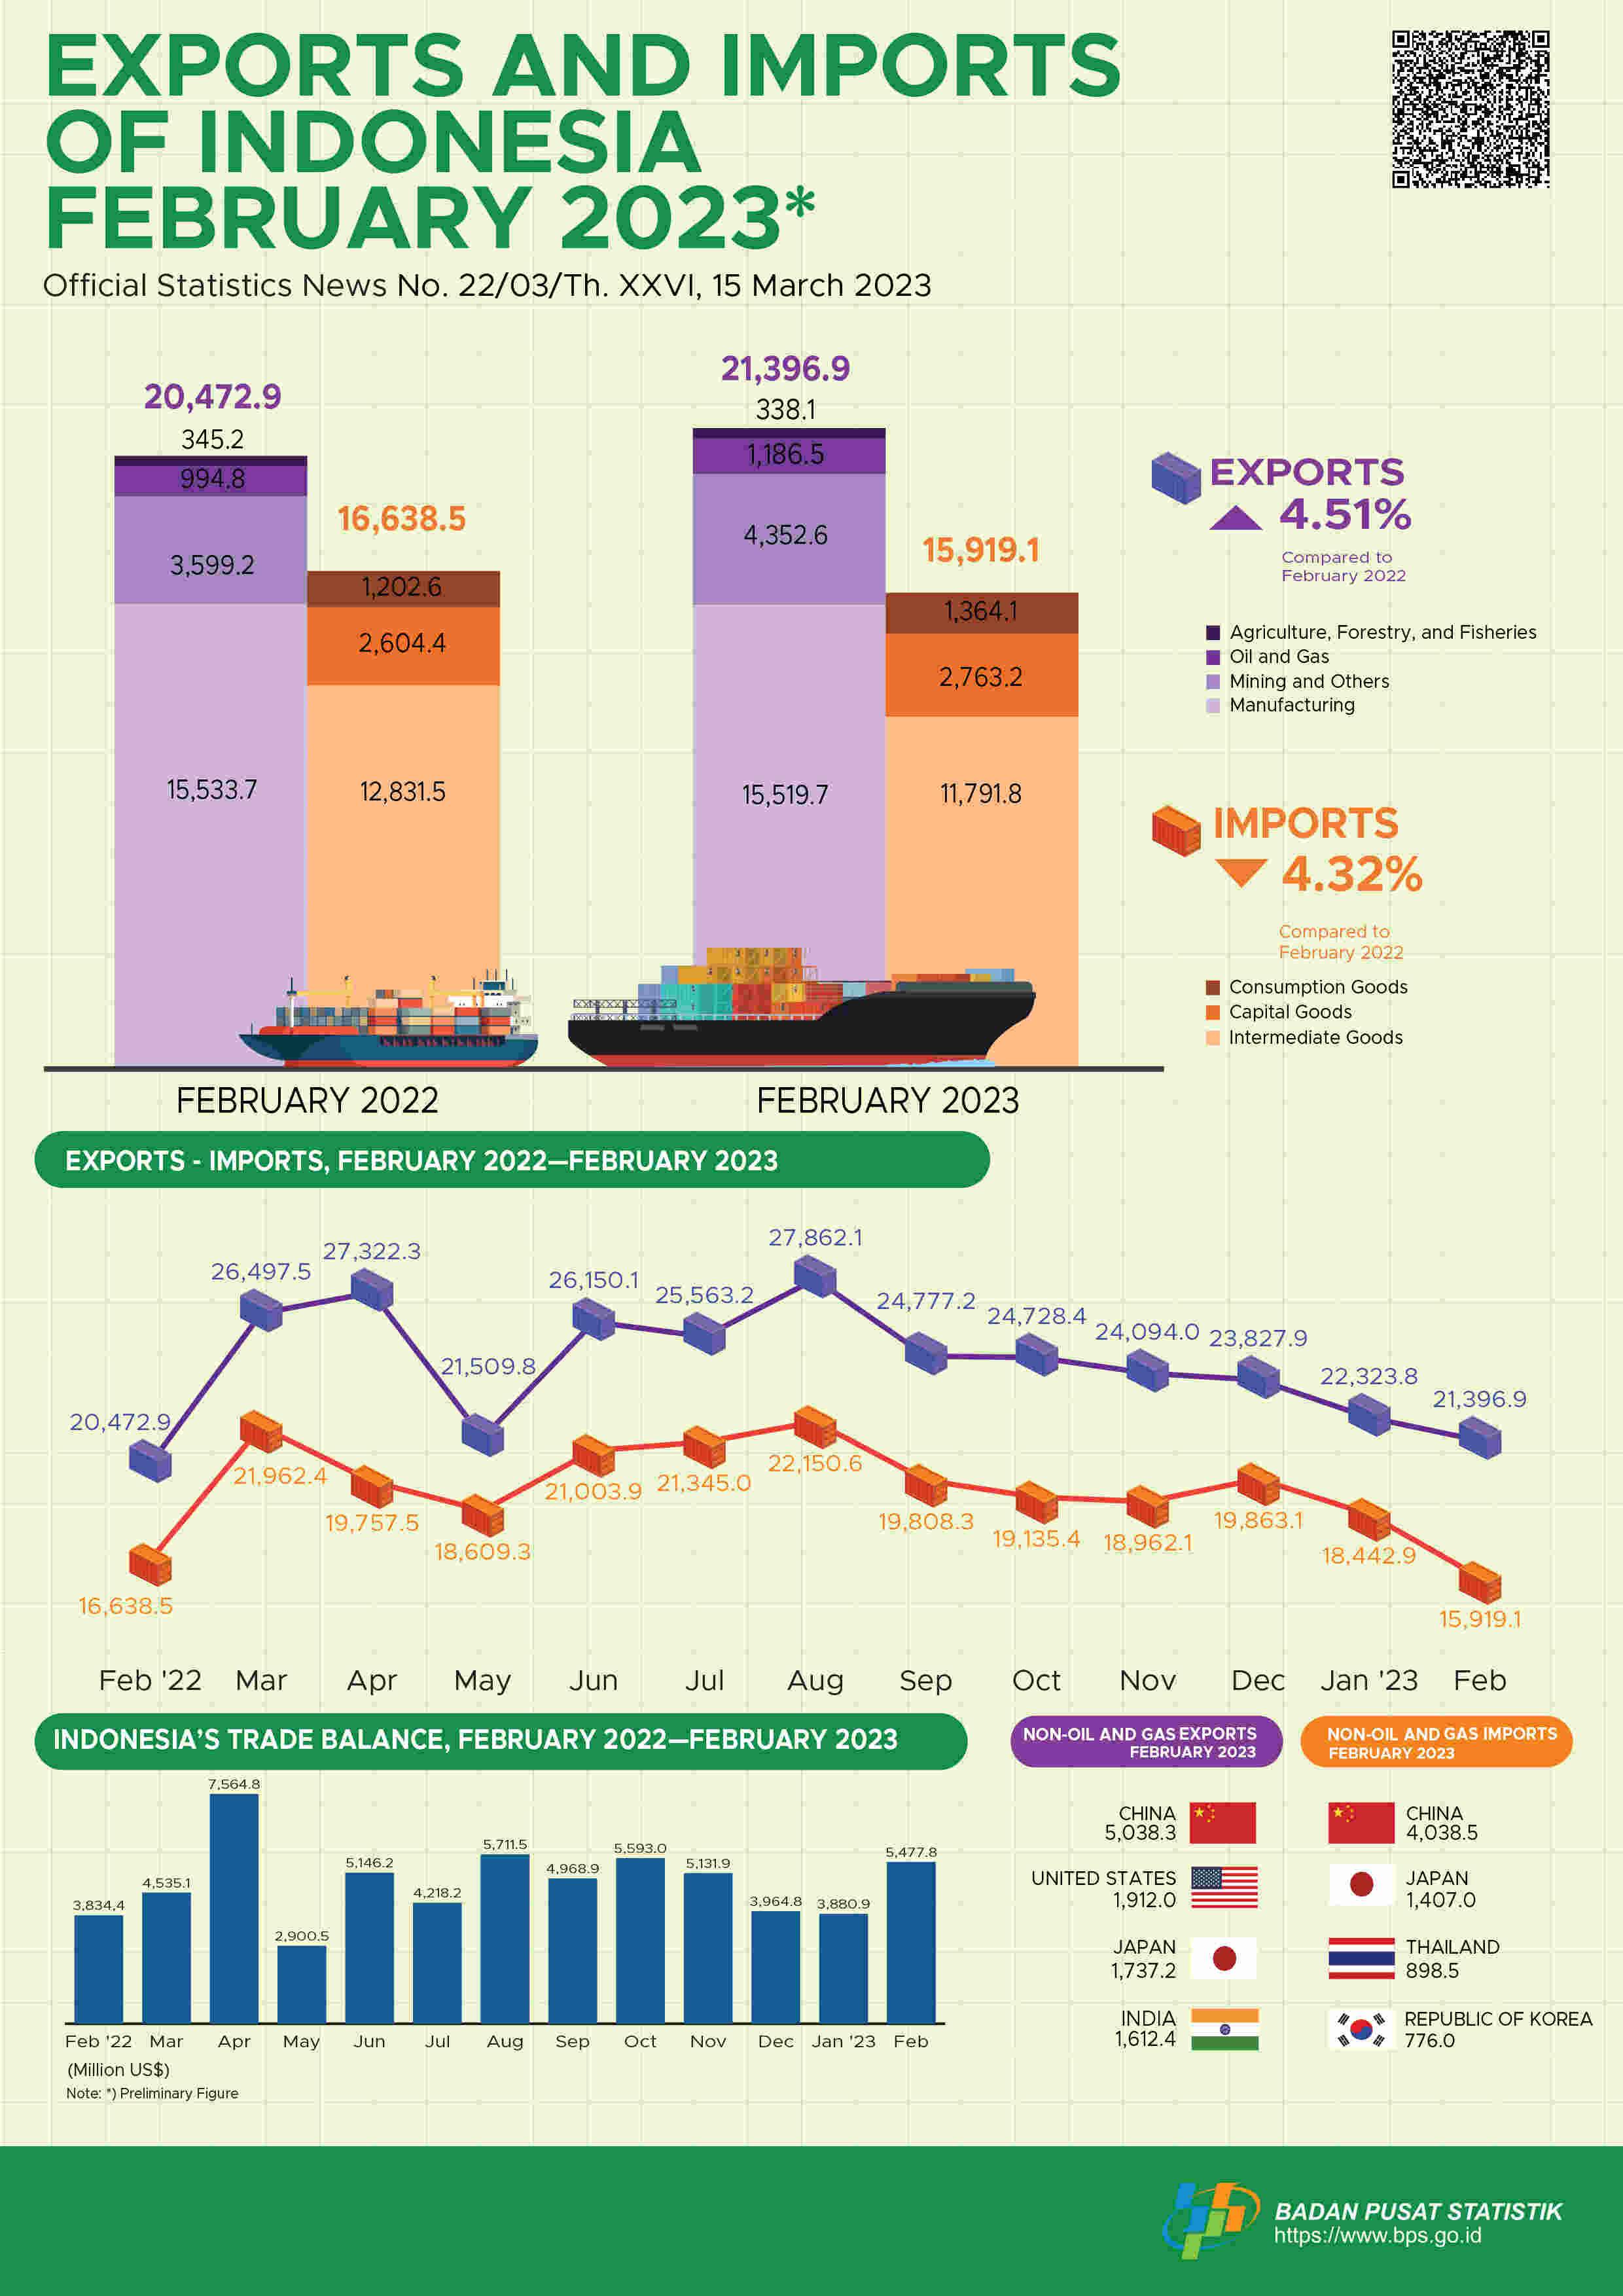 Exports in February 2023 reached US$21.40 billion and Imports in February 2023 reached US$15.92 billion